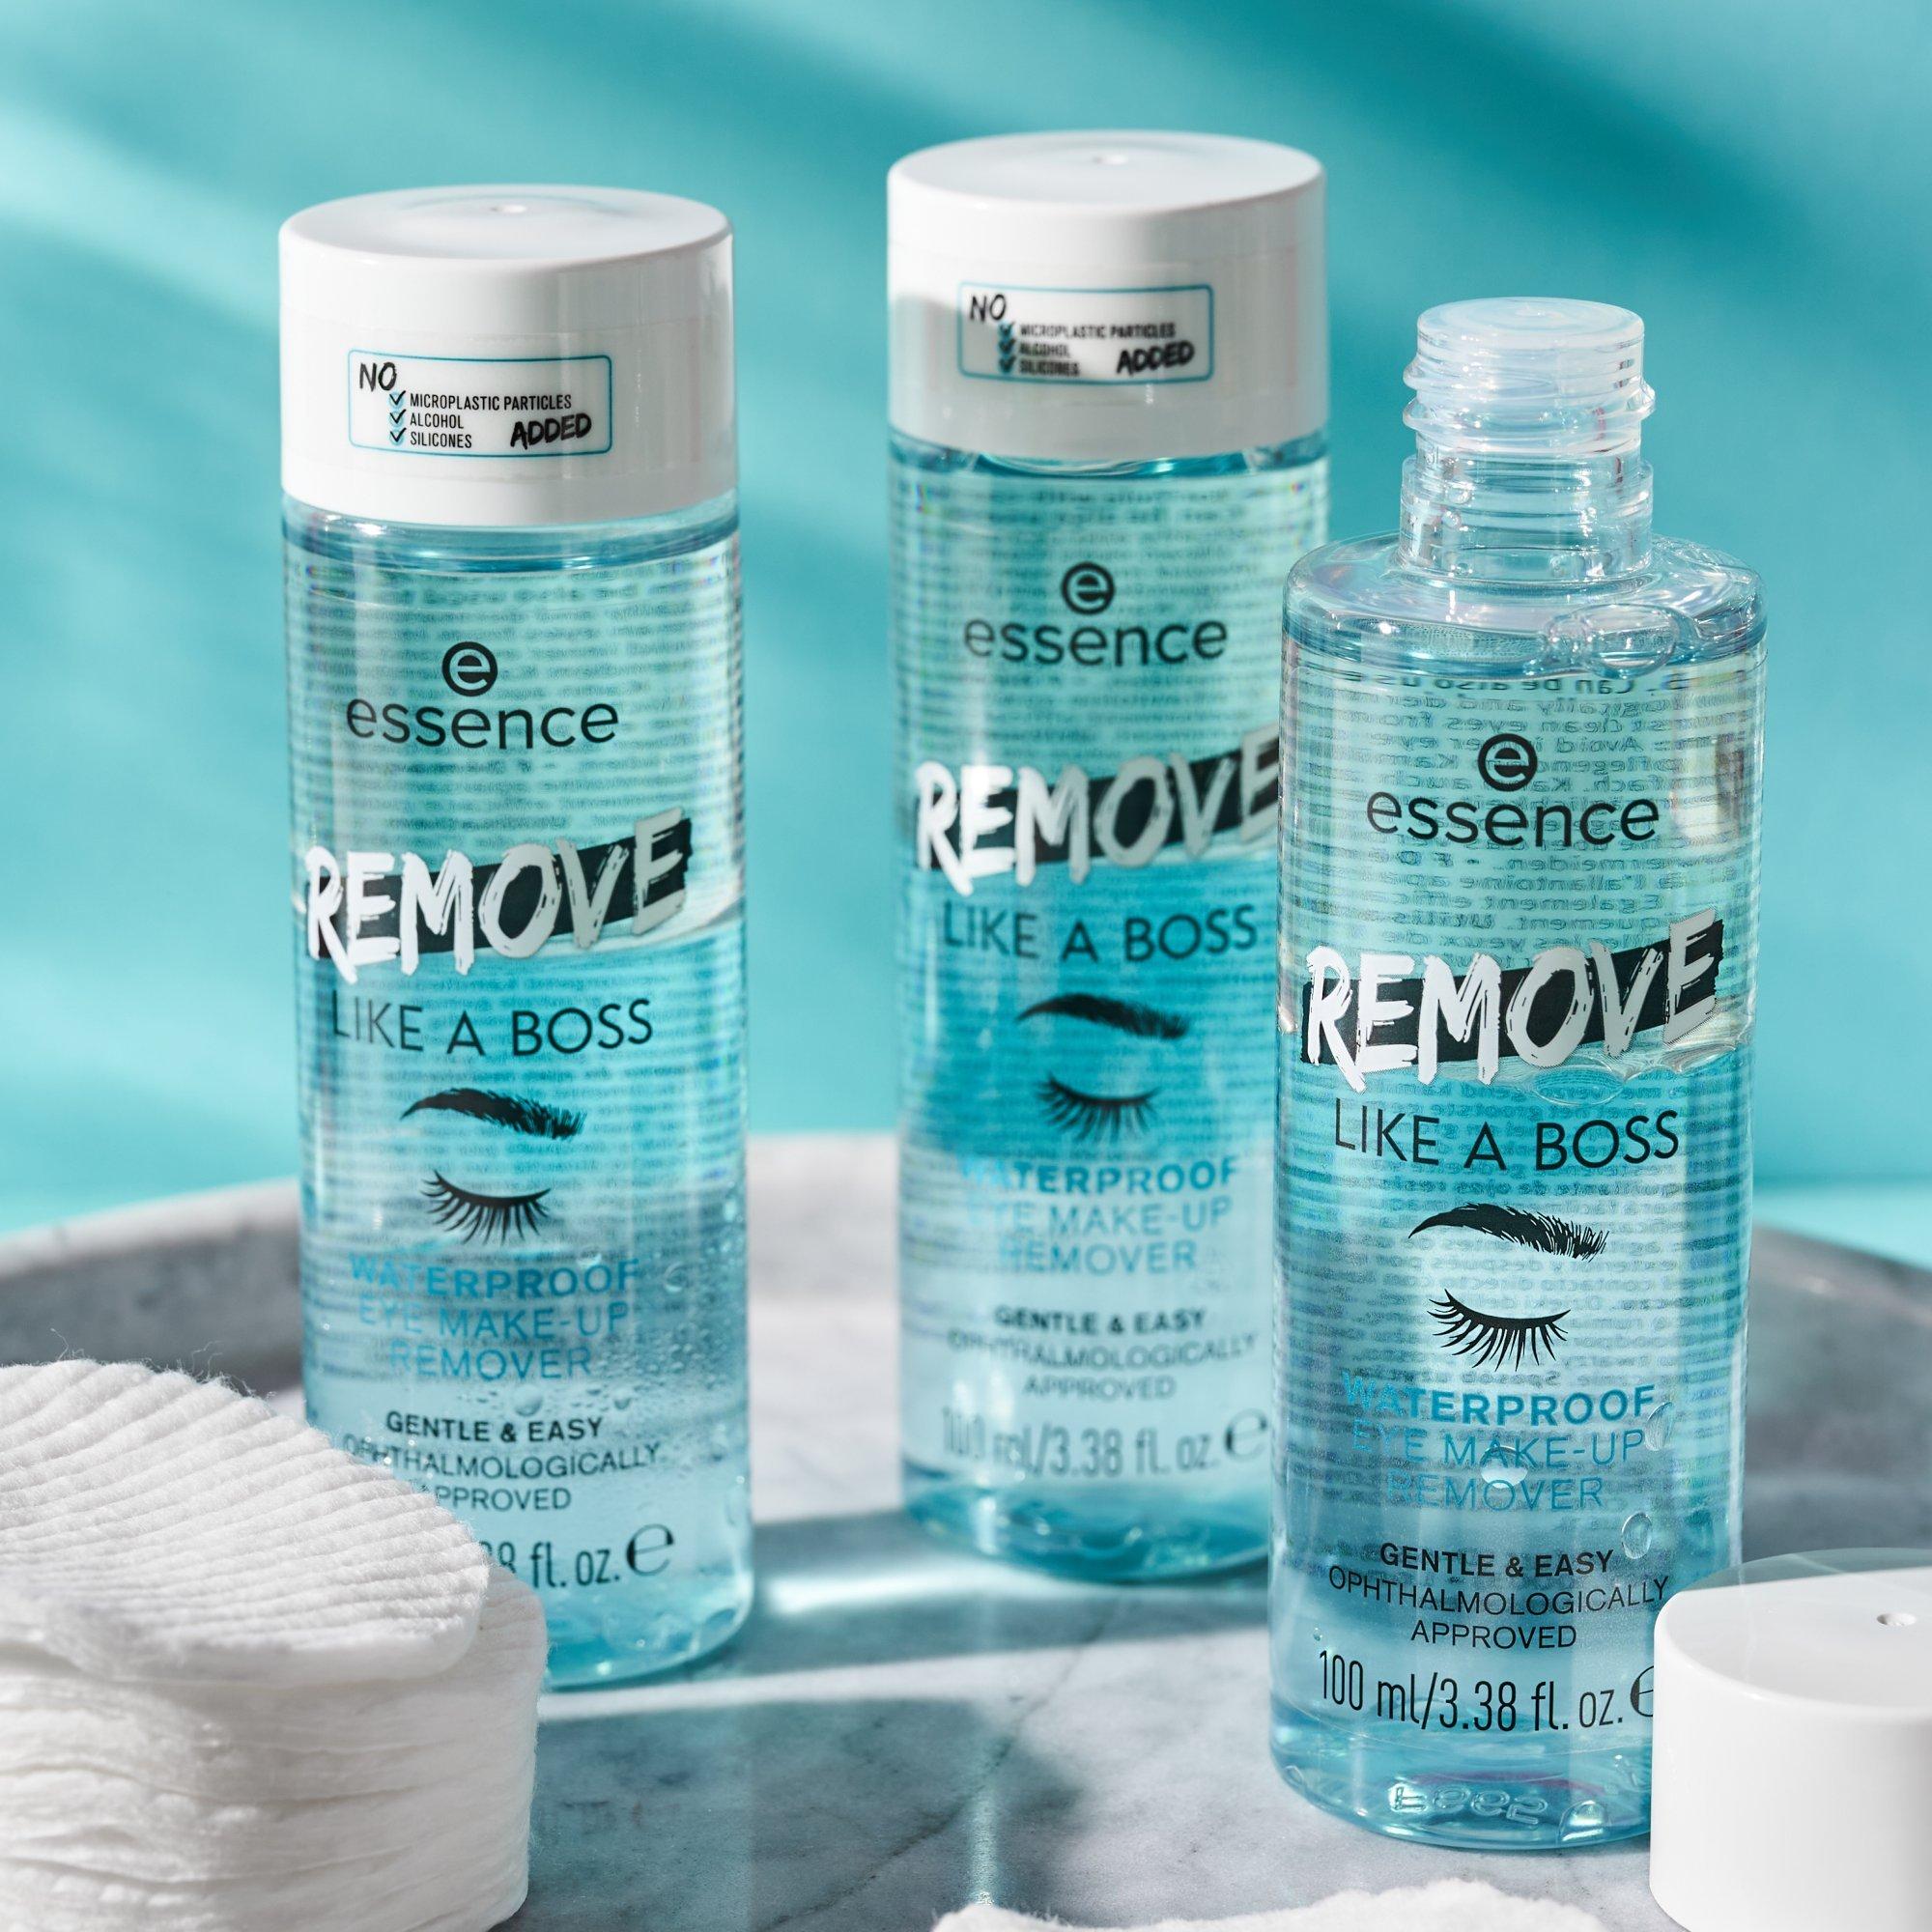 REMOVE LIKE A BOSS WATERPROOF EYE MAKE-UP REMOVER démaquillant